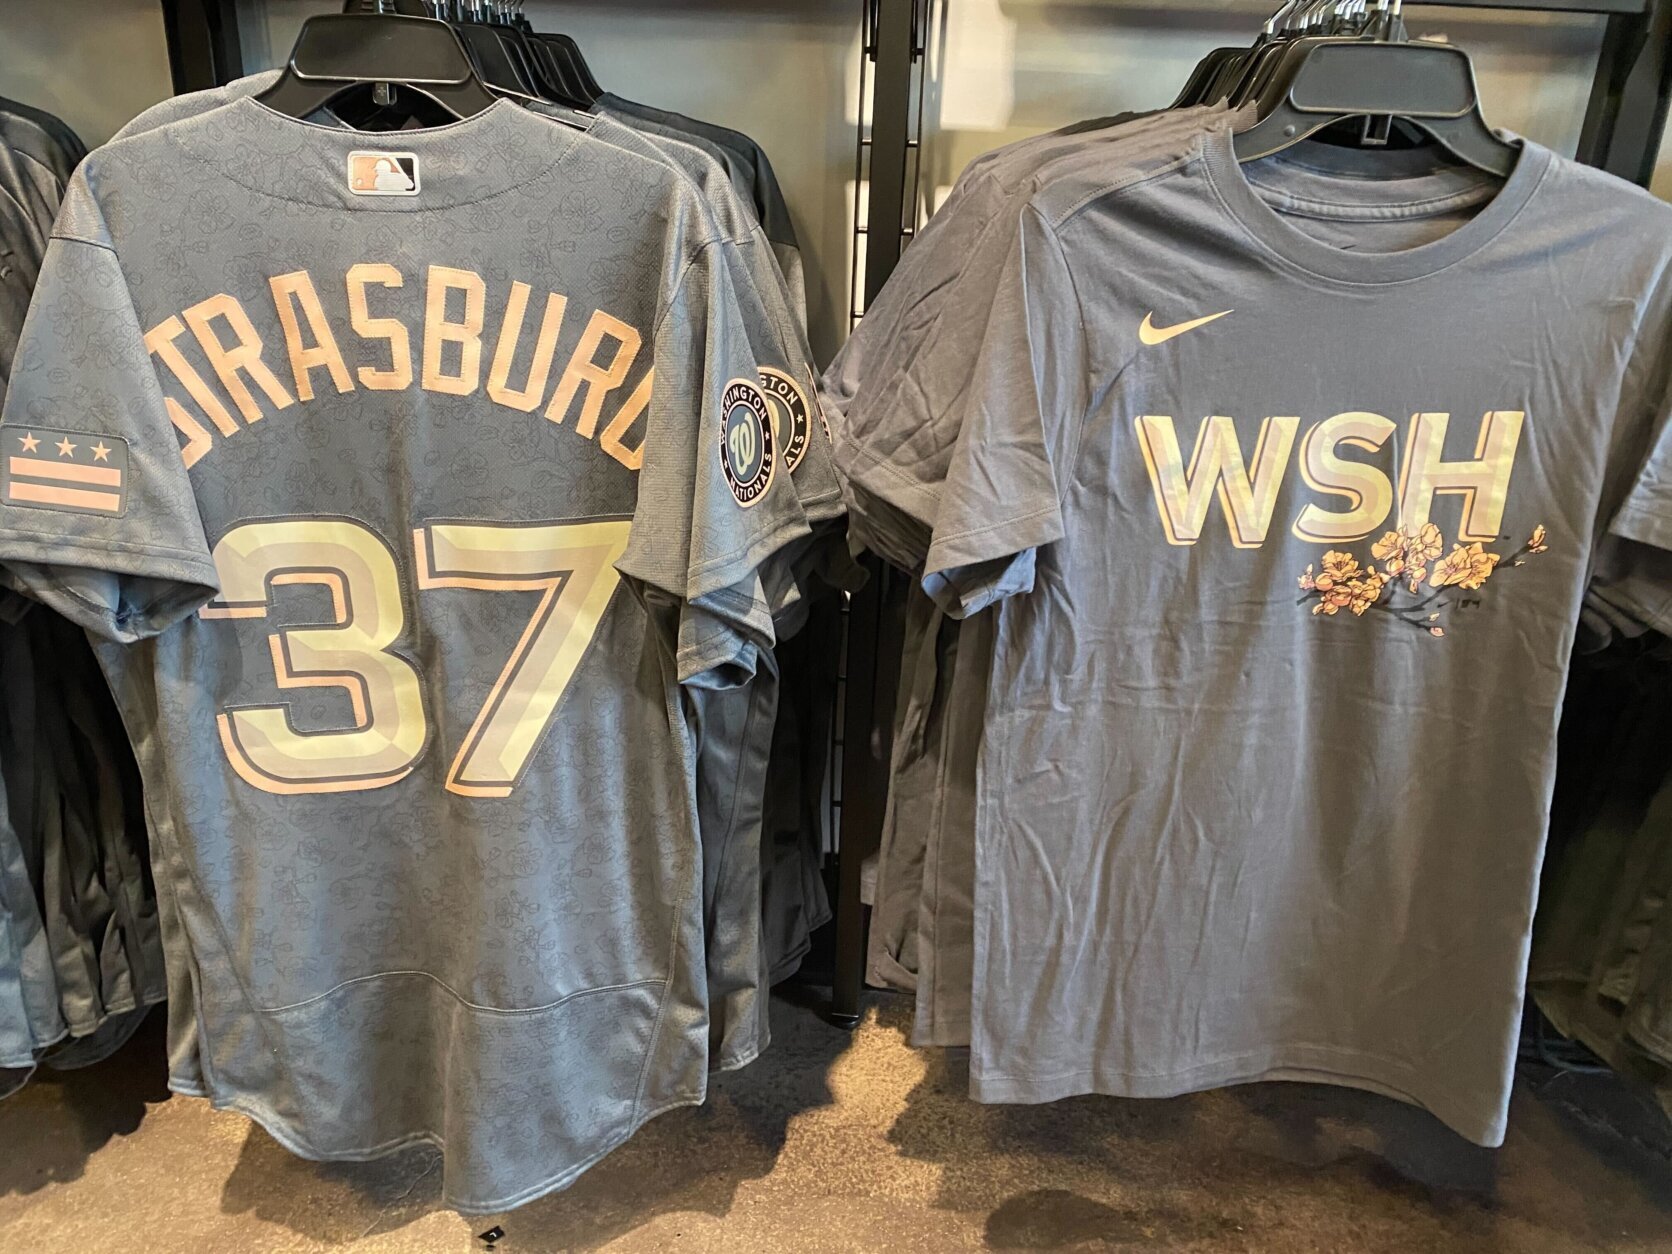 Washington Nationals' City Connect series cherry blossom-themed